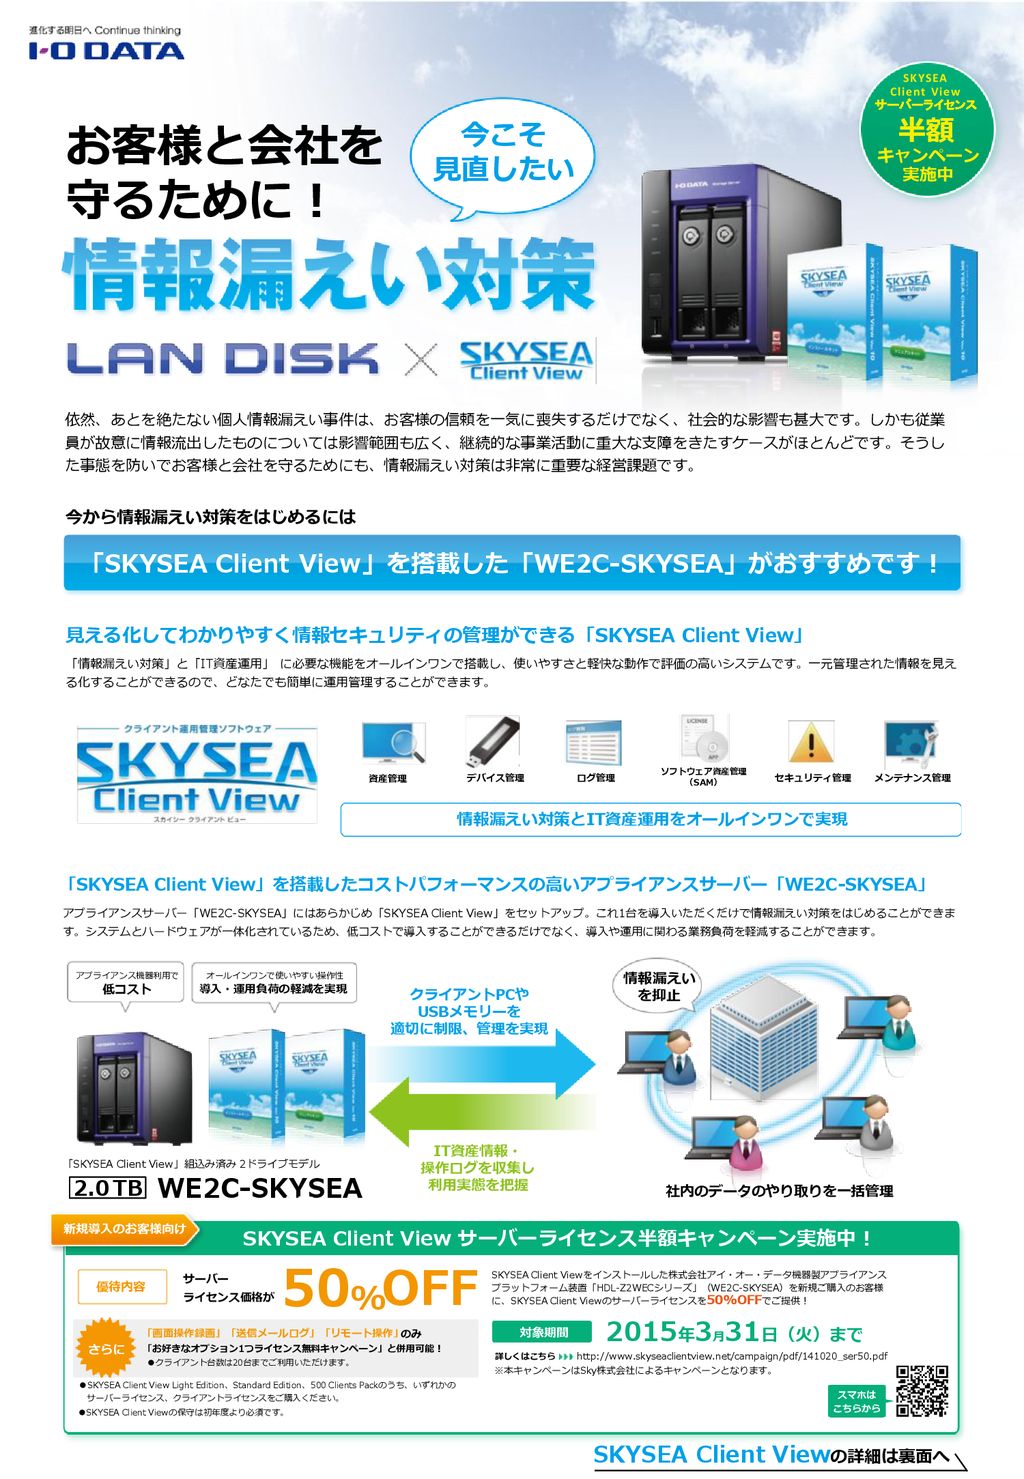 Skysea Client View サーバーライセンス半額キャンペーン実施中 Ppt Download